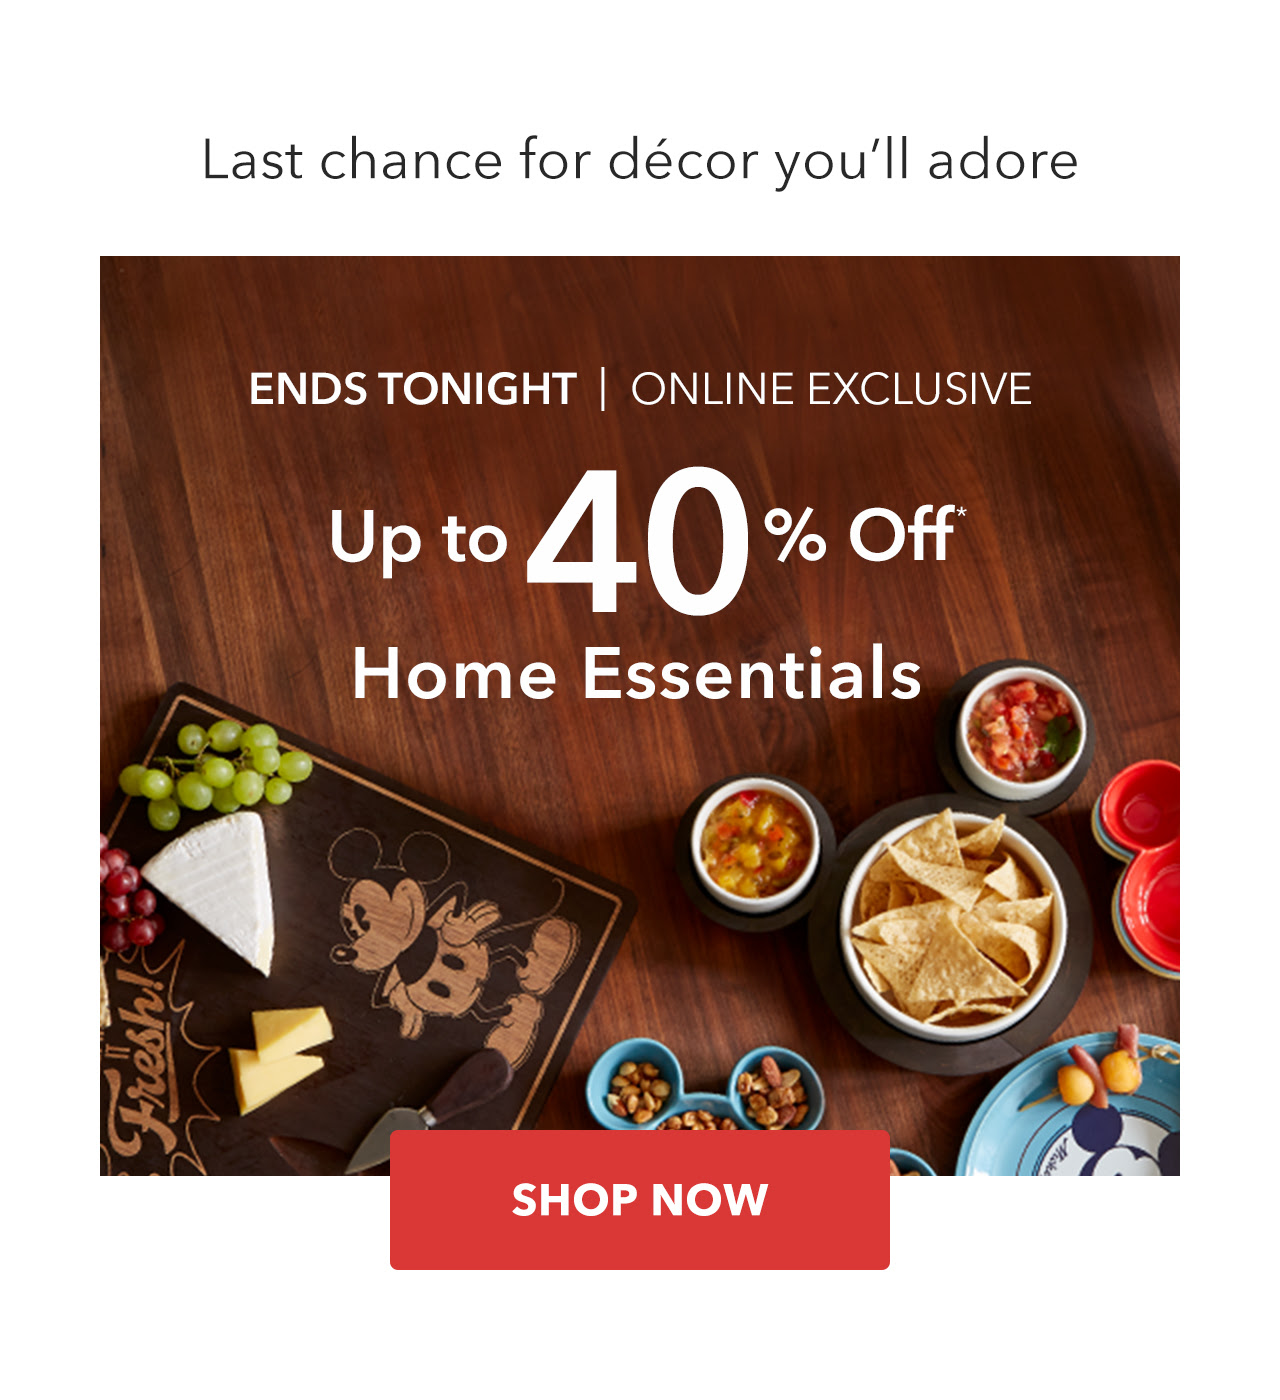 Up to 40% off Home Essentials | Shop Now